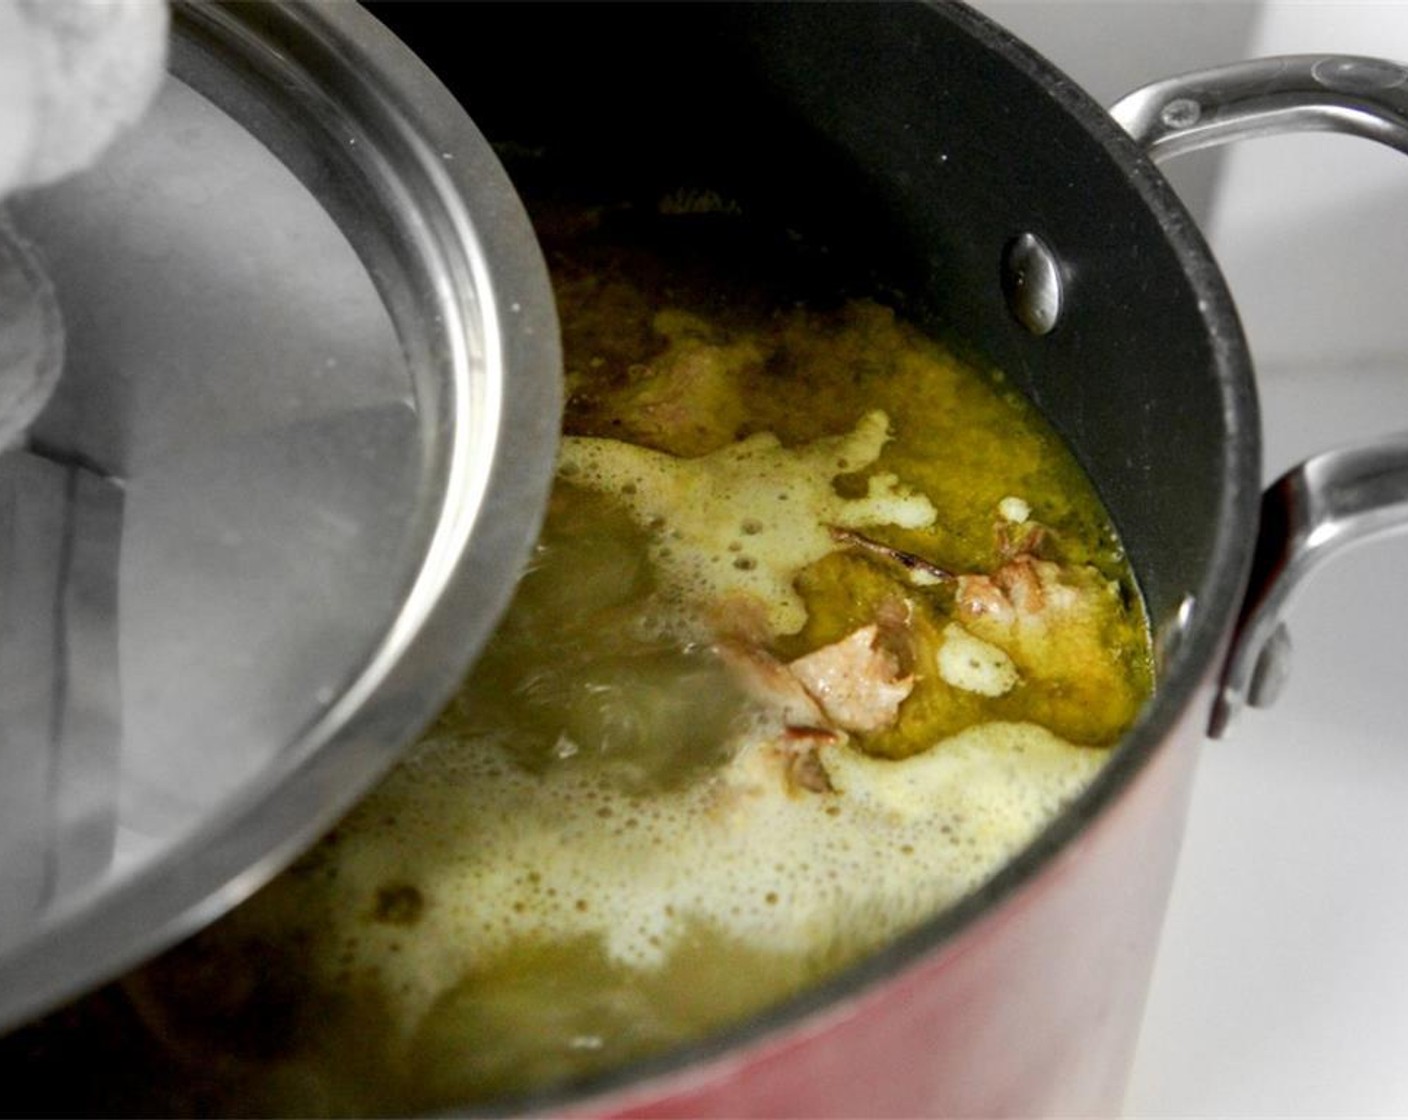 step 9 Partially cover the pot by half, and turn the heat to medium. Keep it at a medium-to-high-boil. Add more water along the way to keep the water level to its original amount until the liquid becomes milky, dense and opaque, about 2 hours.